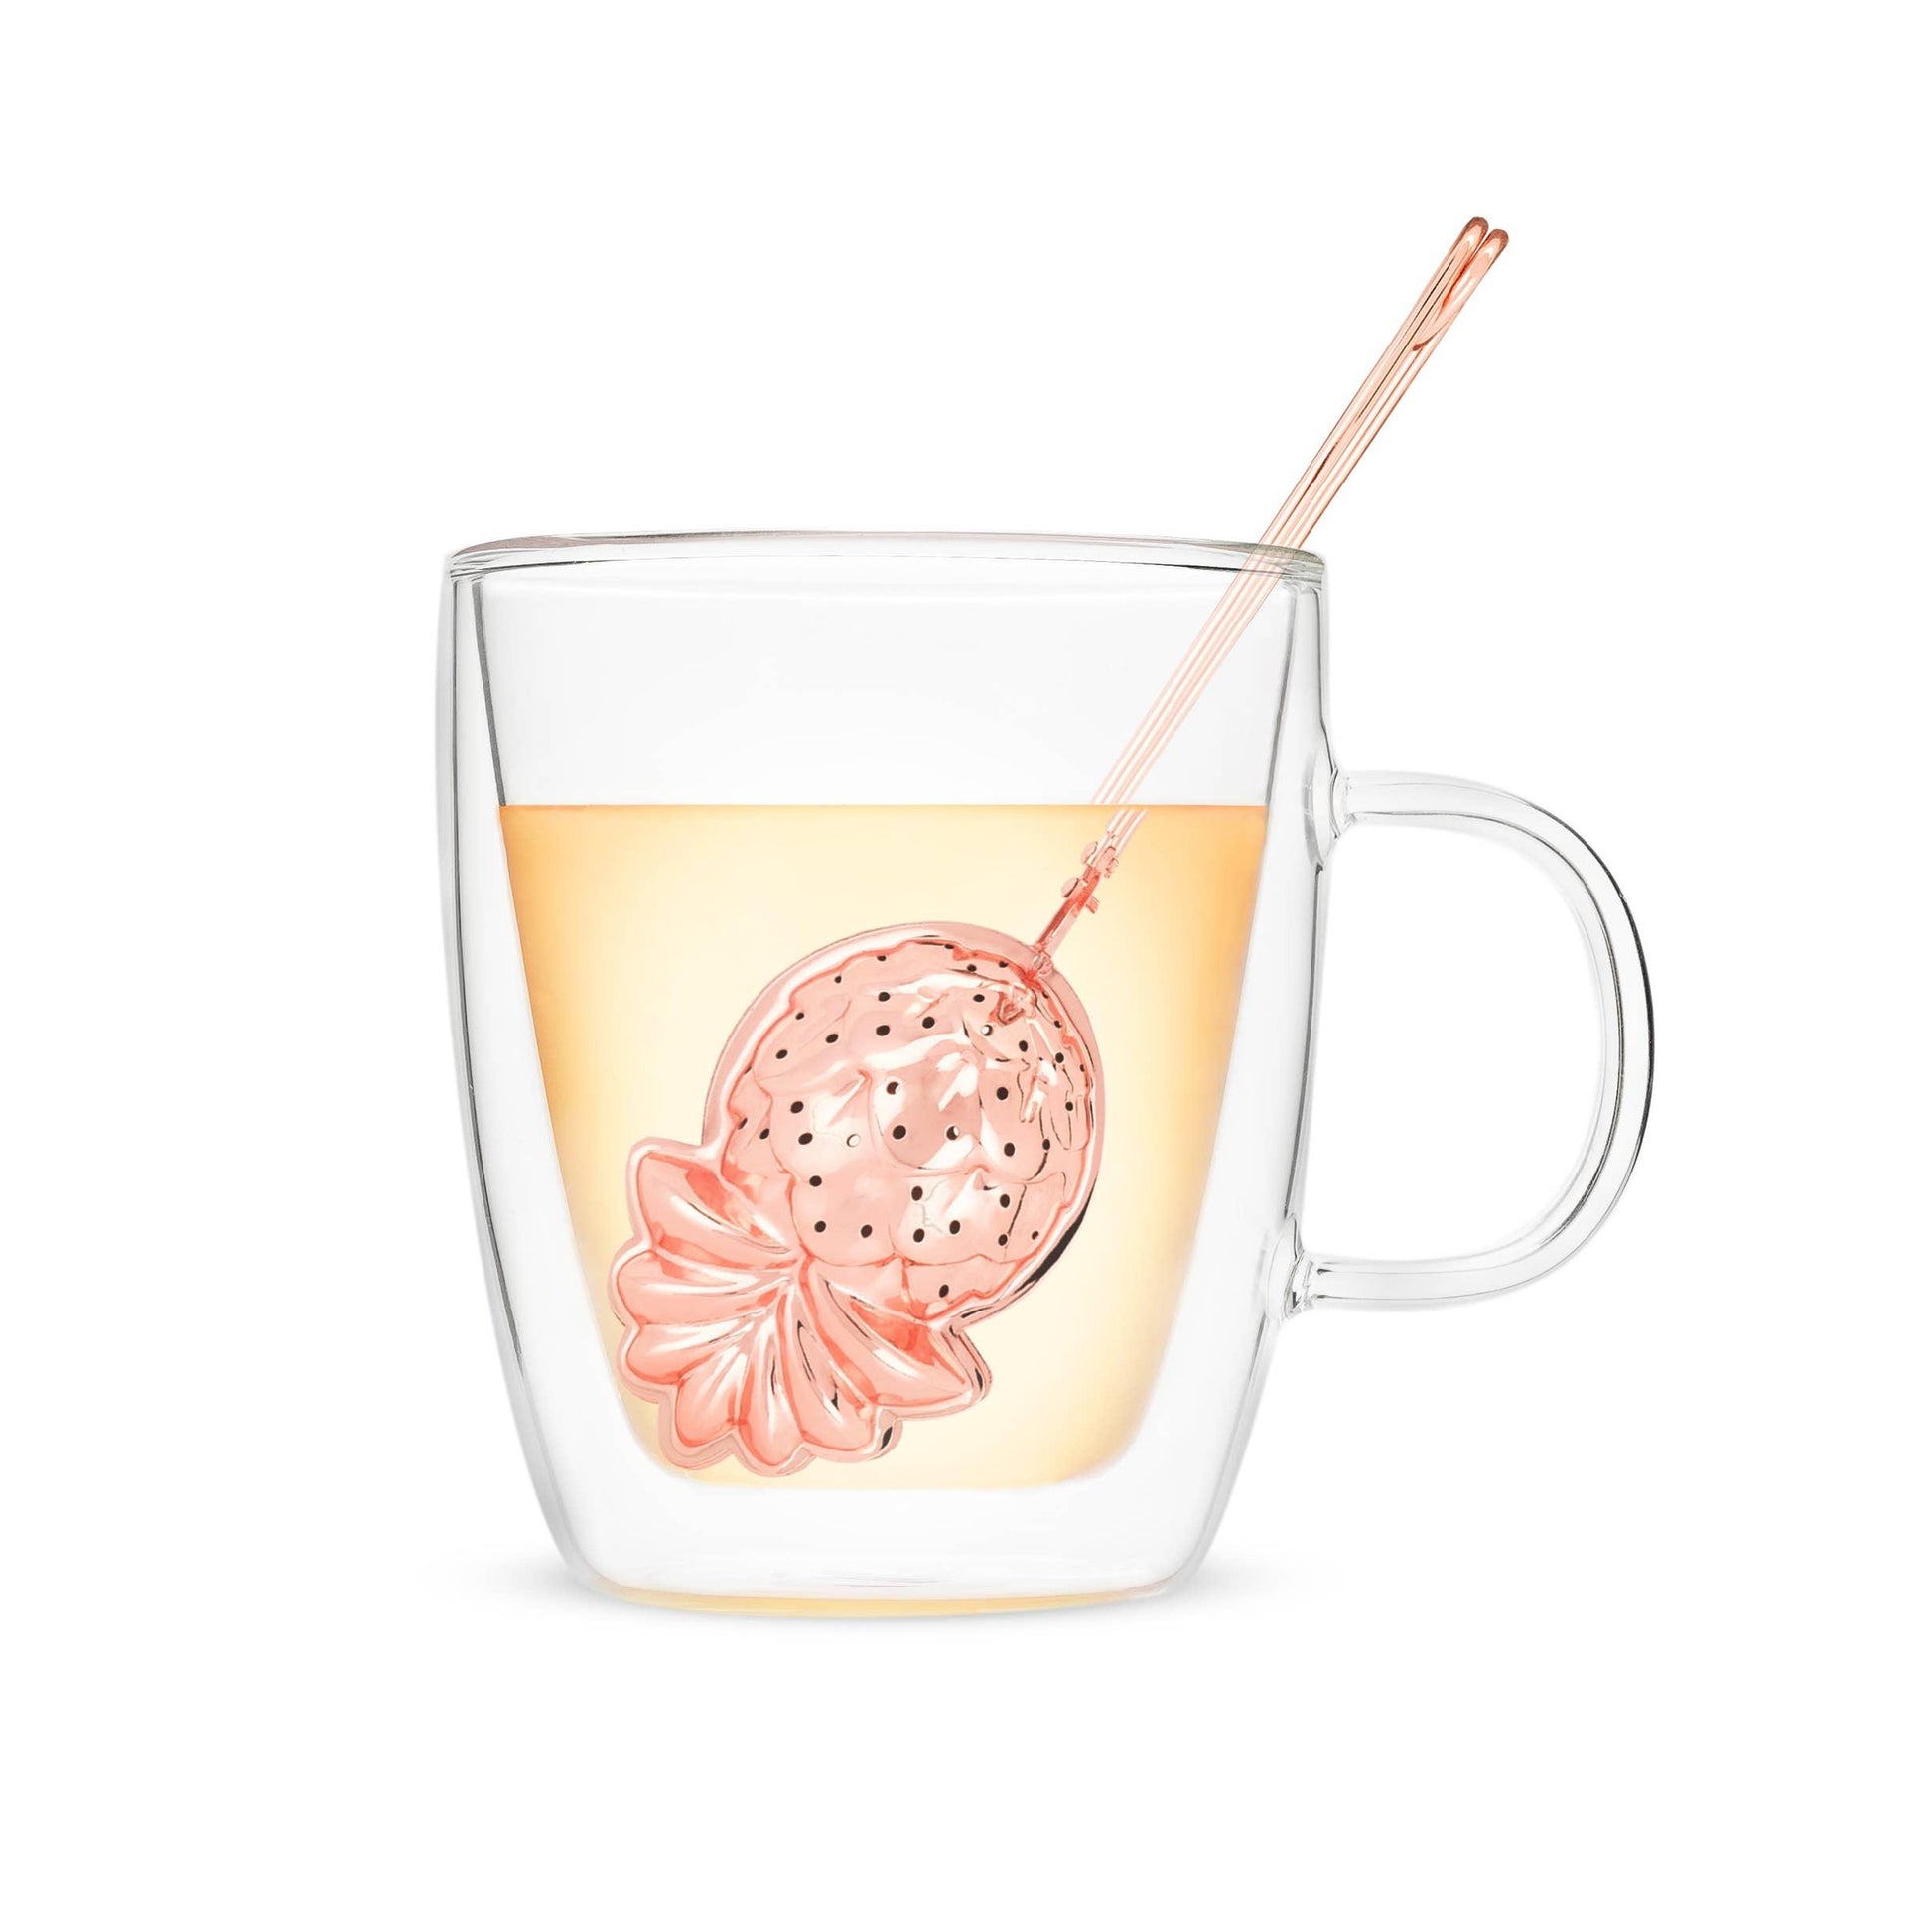 Rose Gold Pineapple Tea Infuser - The Silver Dahlia